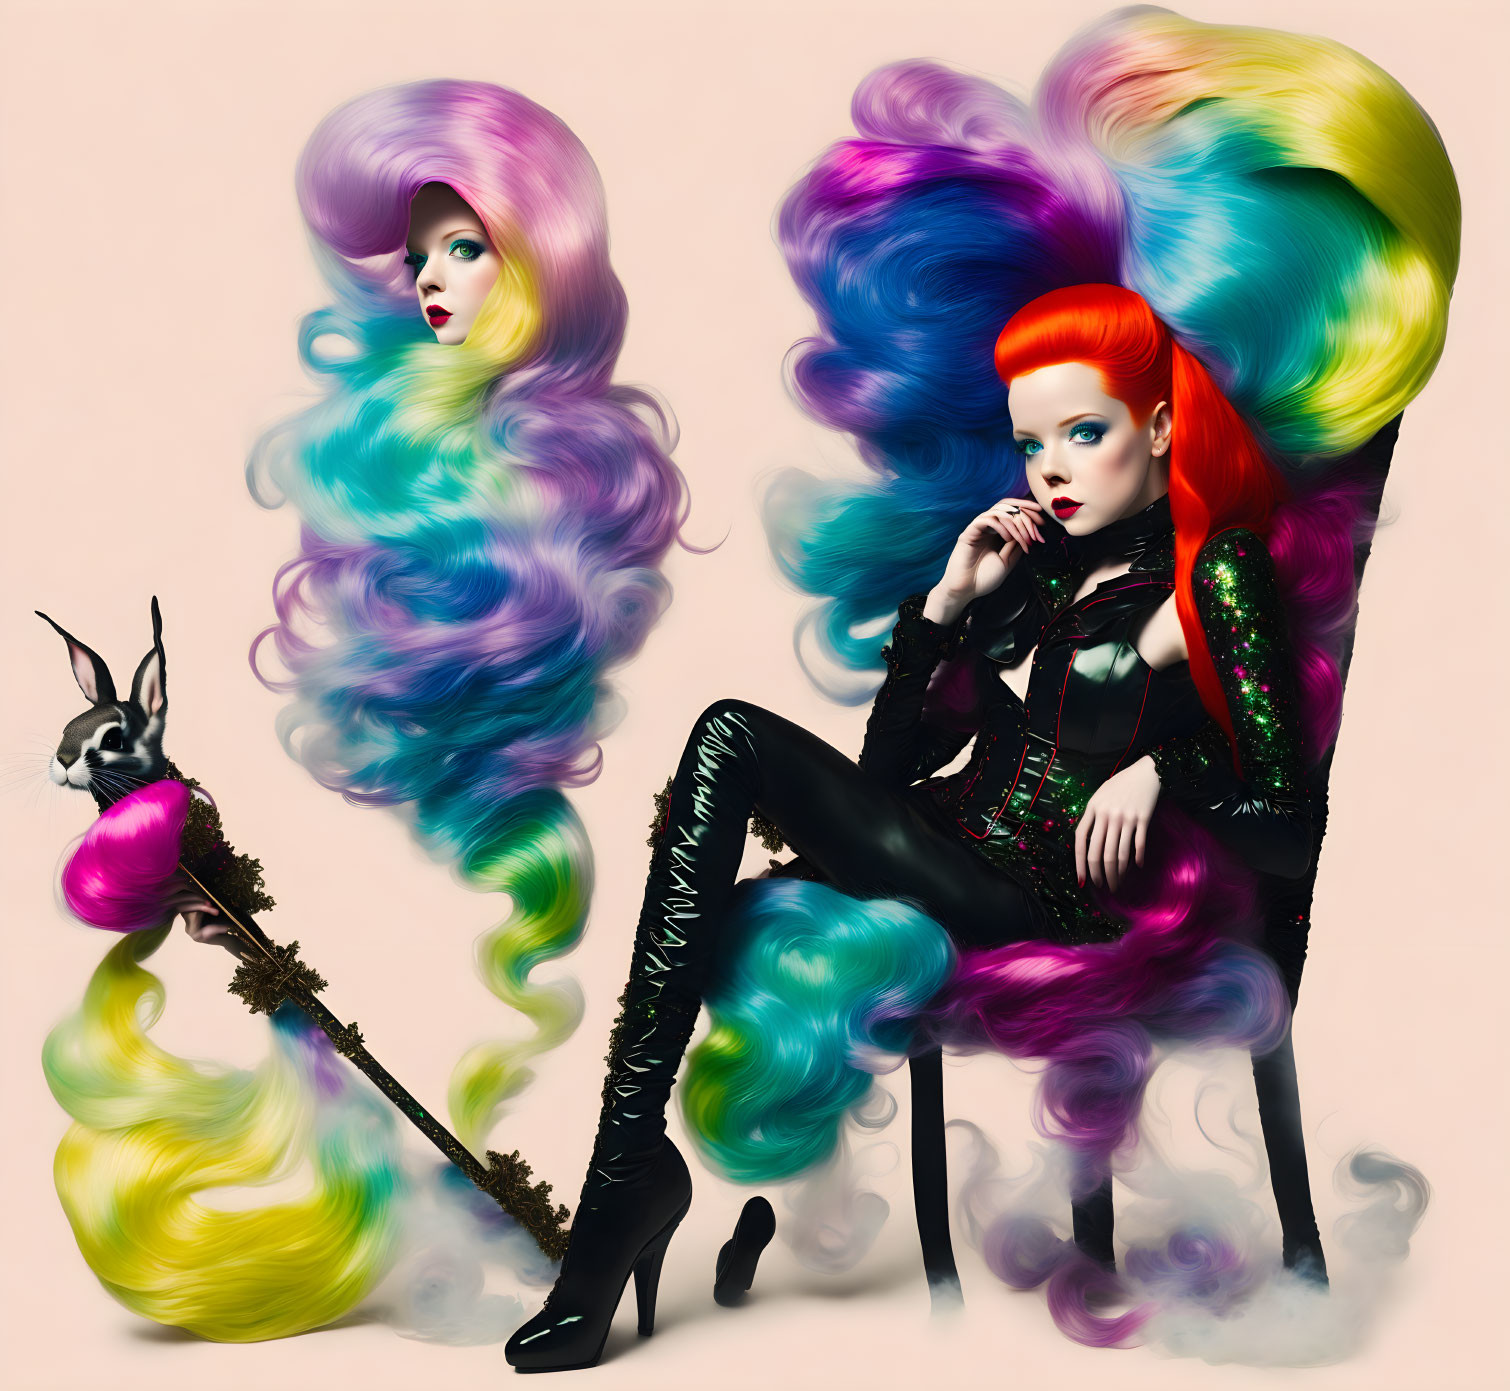 Colorful Witchy Women with Exaggerated Hairstyles and Broom Pose Artistically